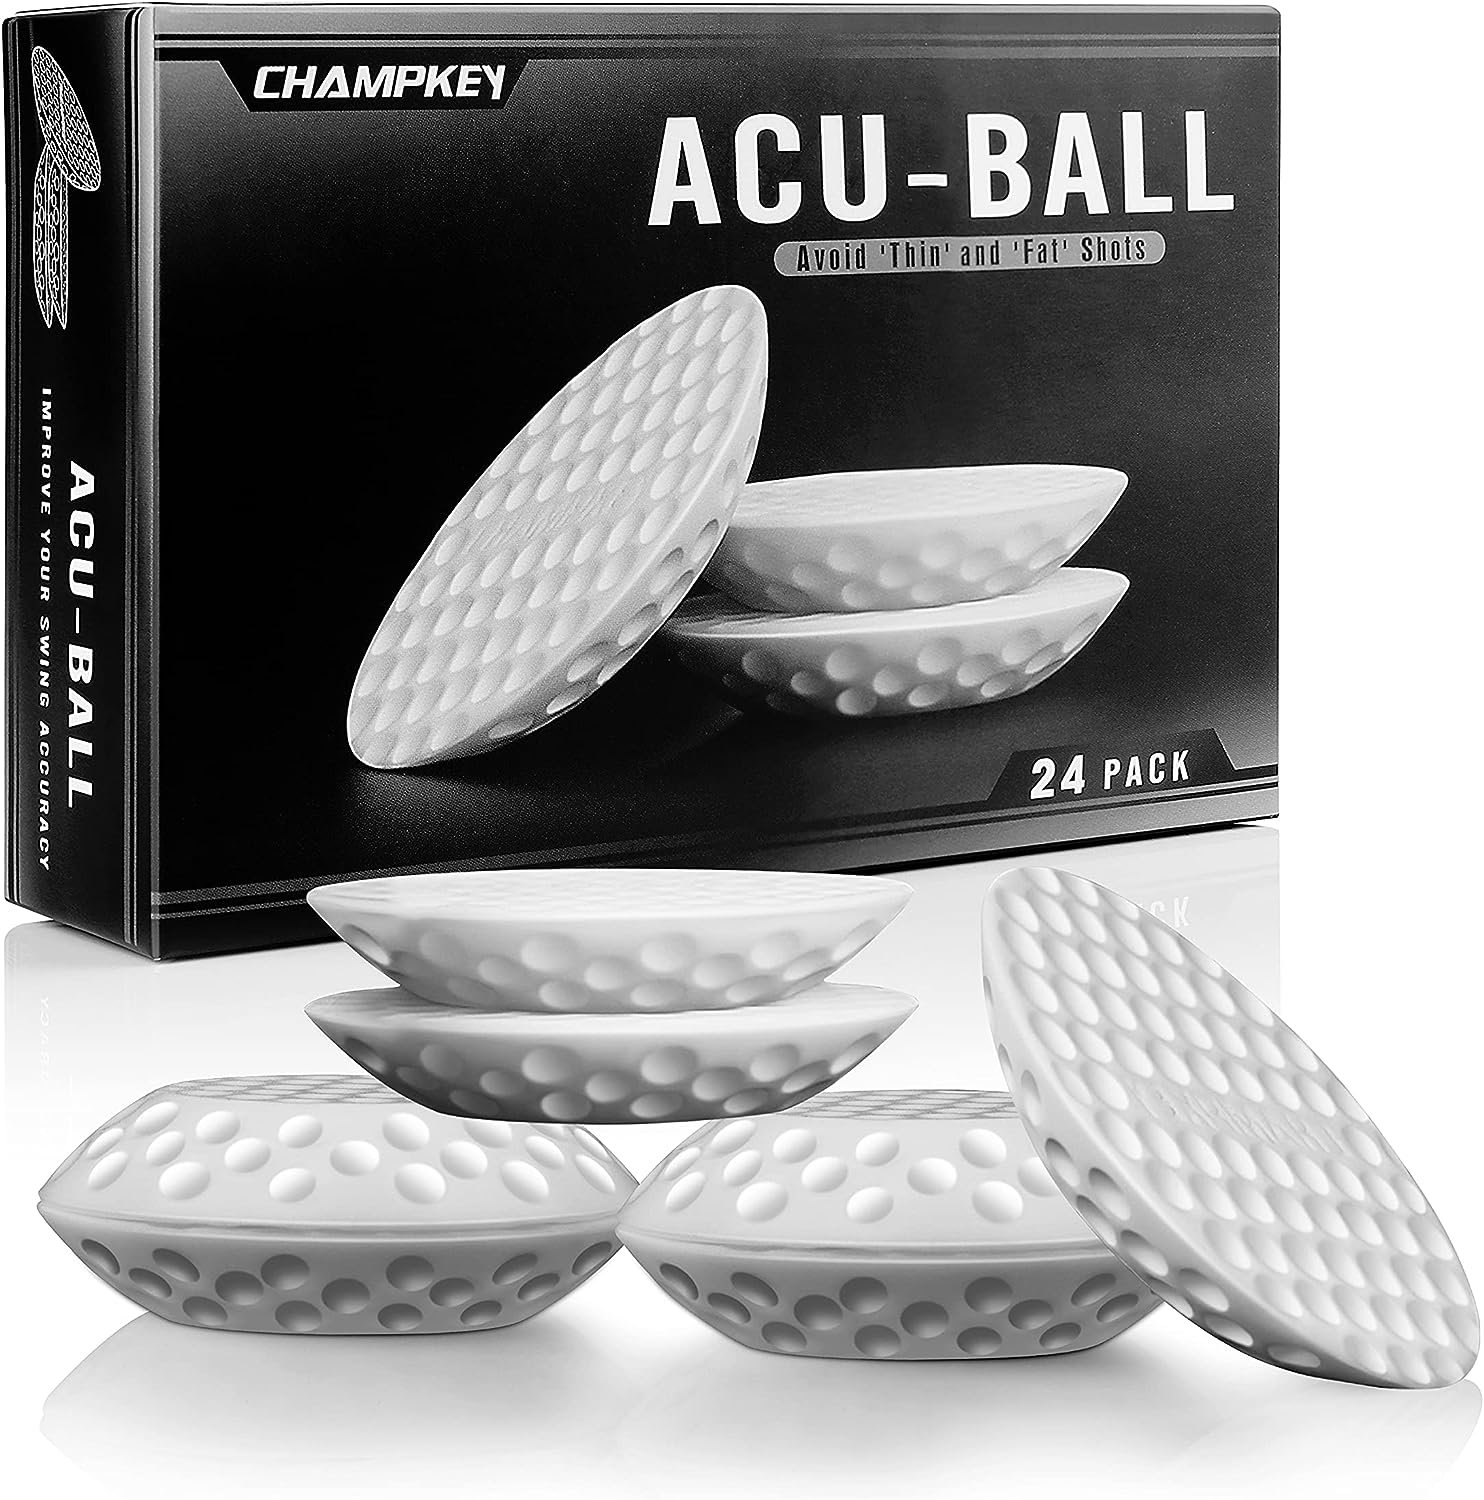 Champkey Superior ACU - Ball 24 Pack| Excellent Golf Swing Training Ball - Practice Golf Ball Ideal for Indoor  Outdoor Training